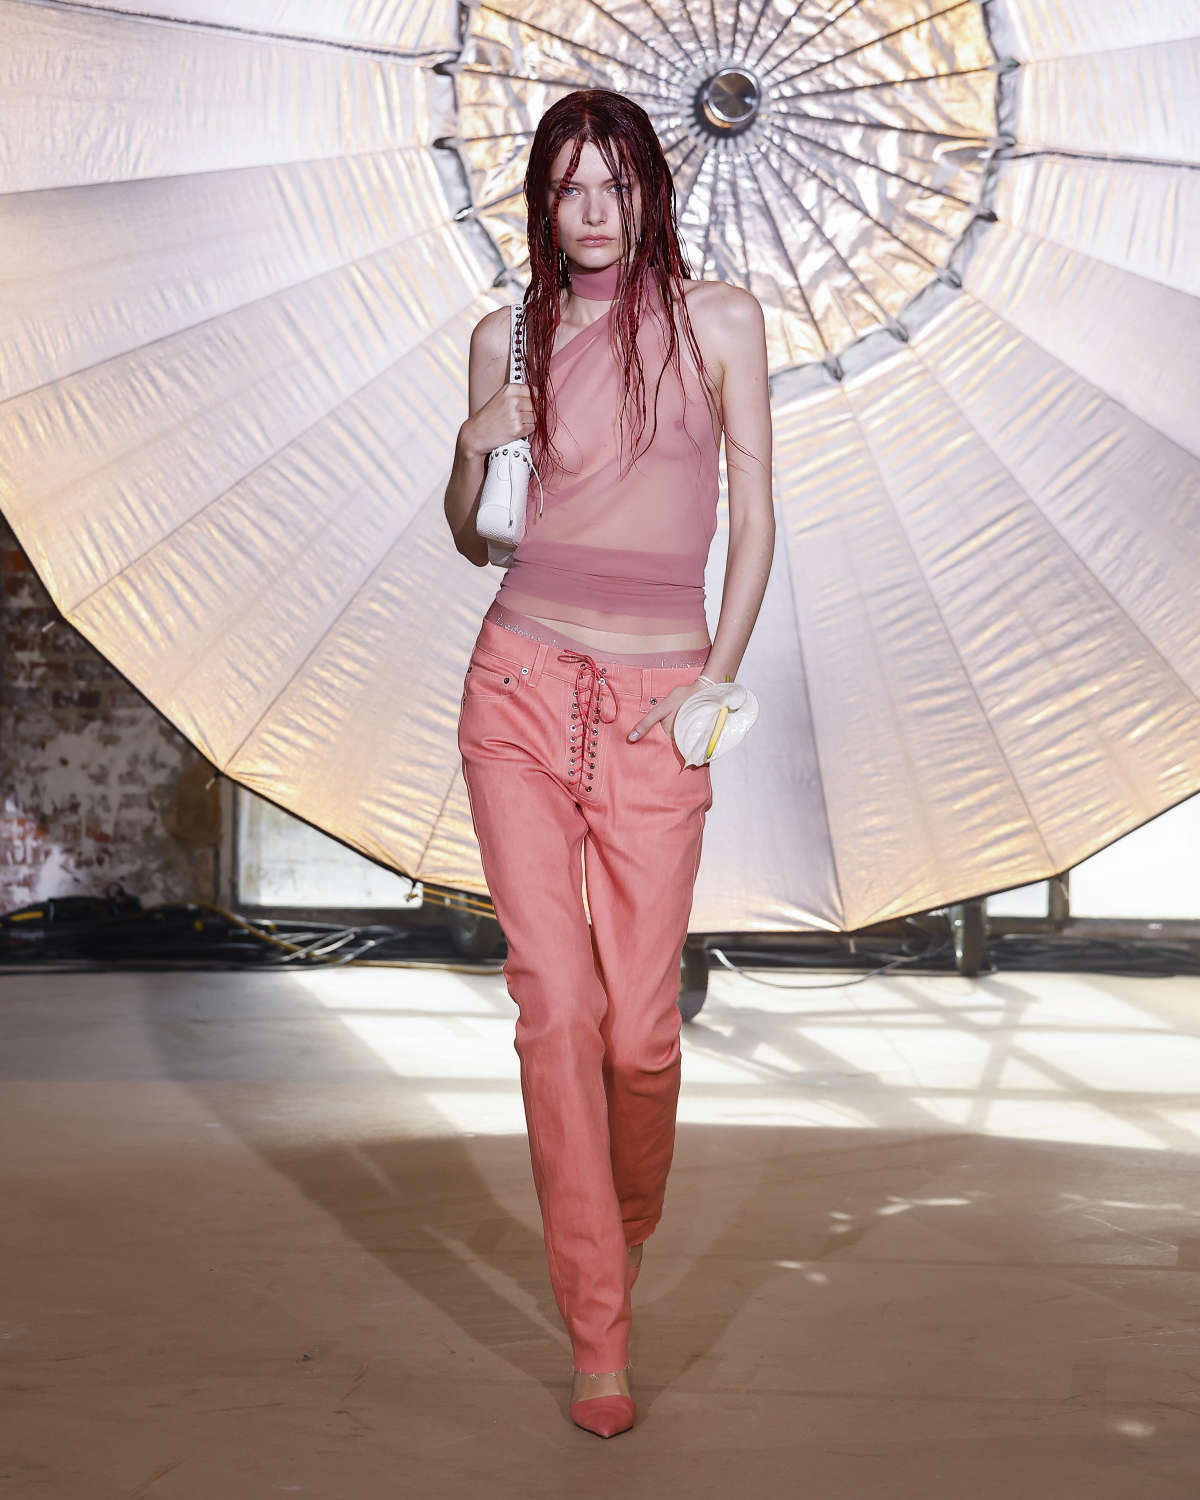 Ludovic De Saint Sernin Presents Its New Spring Summer 2023 Collection: Mirage